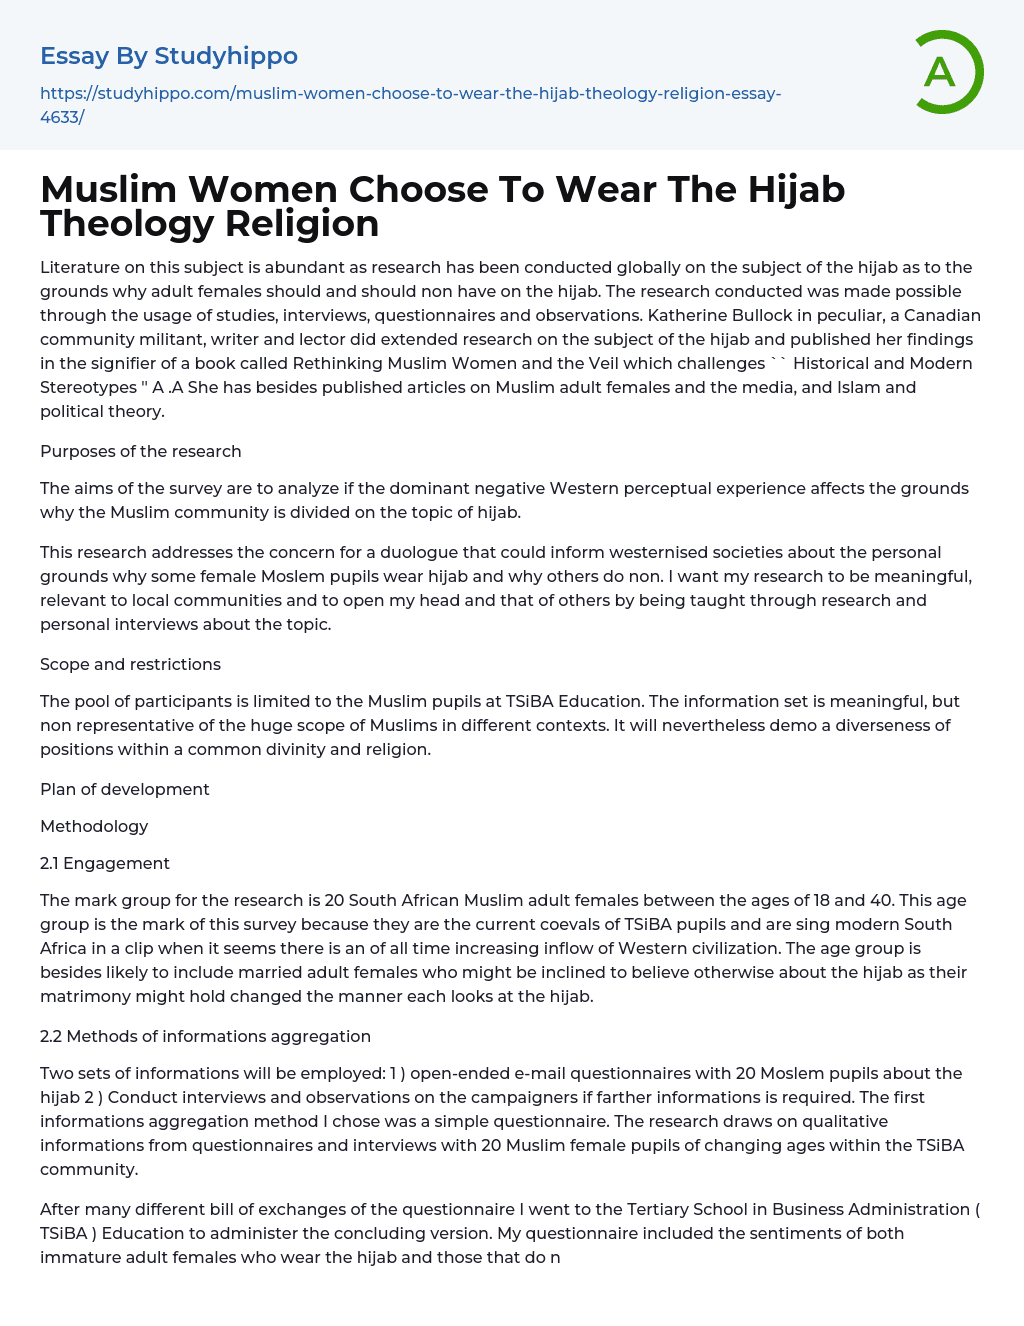 Muslim Women Choose To Wear The Hijab Theology Religion Essay Example